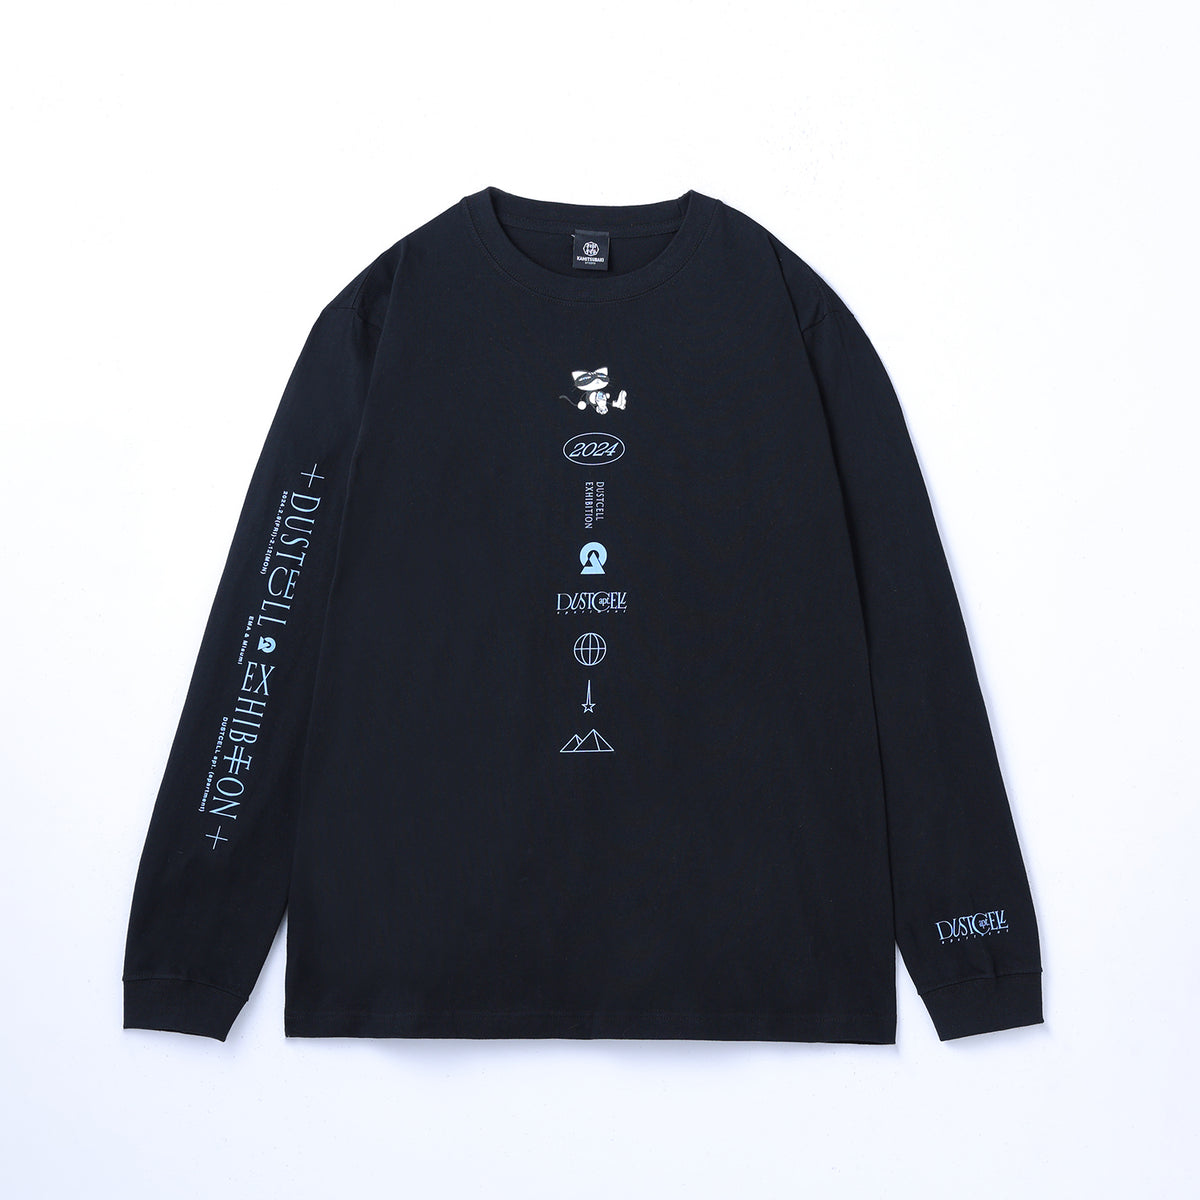 【DUSTCELL】「DUSTCELL apt.」ロングスリーブTシャツ／BLACK／EXHIBITION「DUSTCELL apt. -a